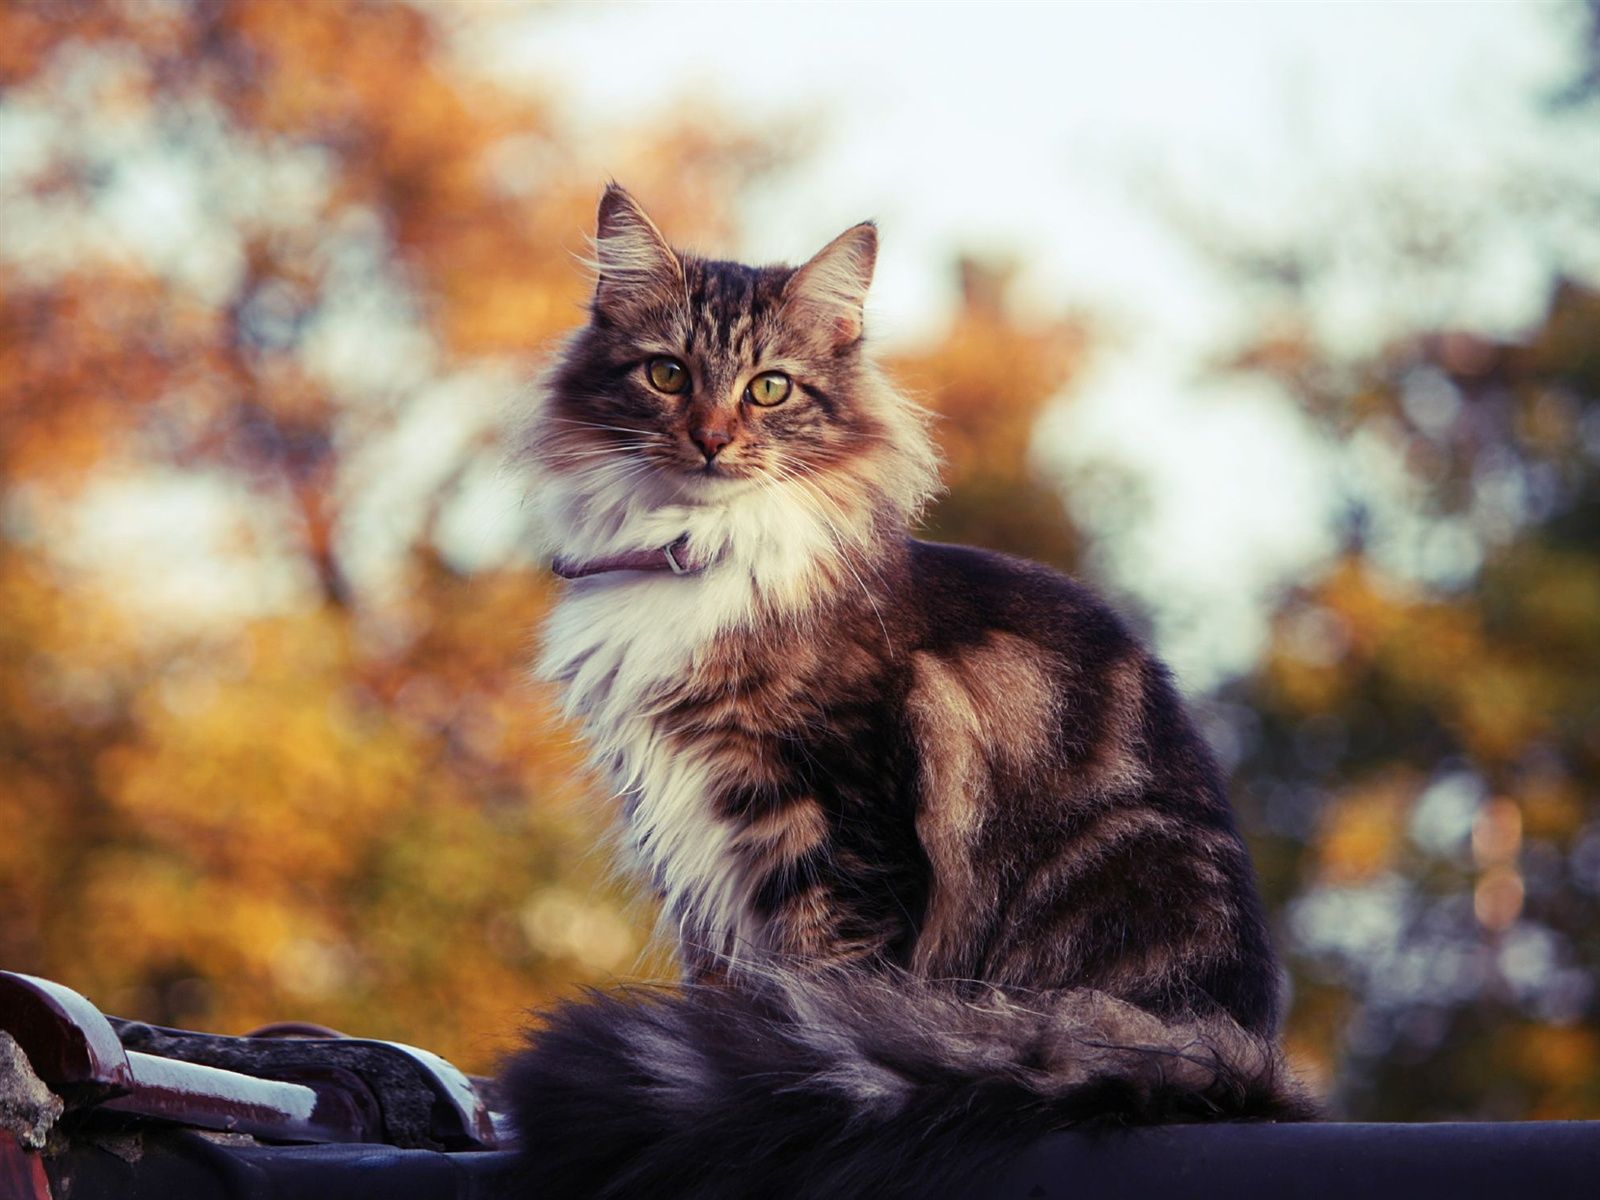 Siberian cat outdoors in autumn wallpaper and image, picture, photo